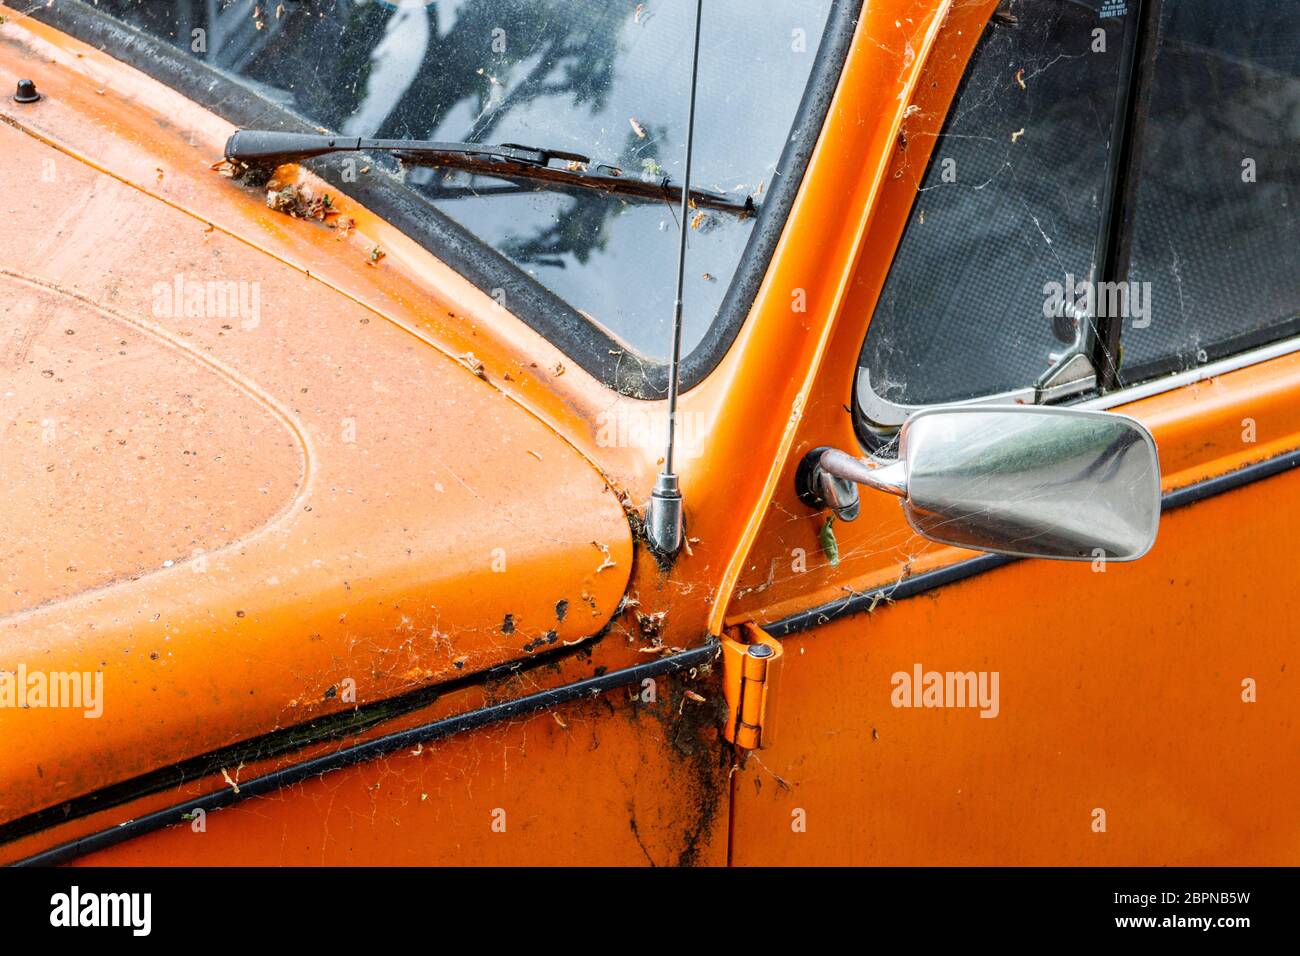 Close-up of an old orange Volkswagon Beetle car, rusty, unwashed and neglected, London, UK Stock Photo